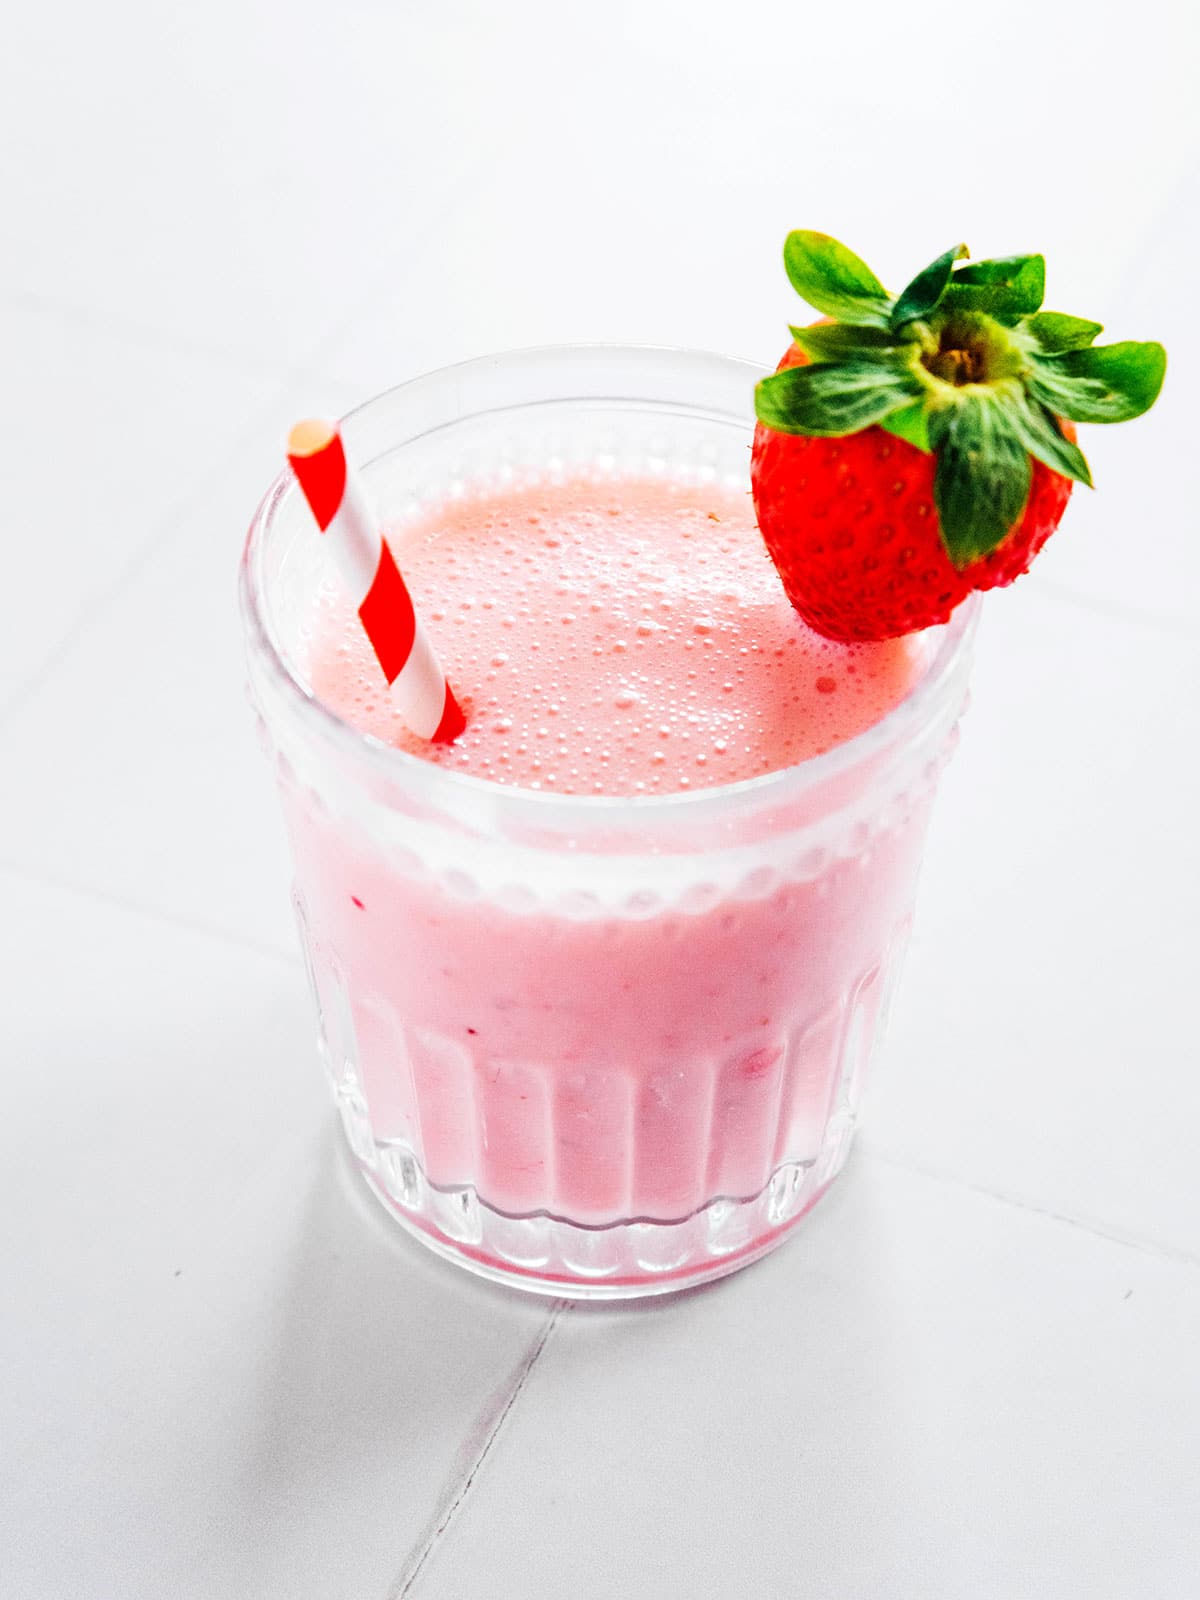 A glass of strawberry kefir with a straw and fresh strawberry on the rim.